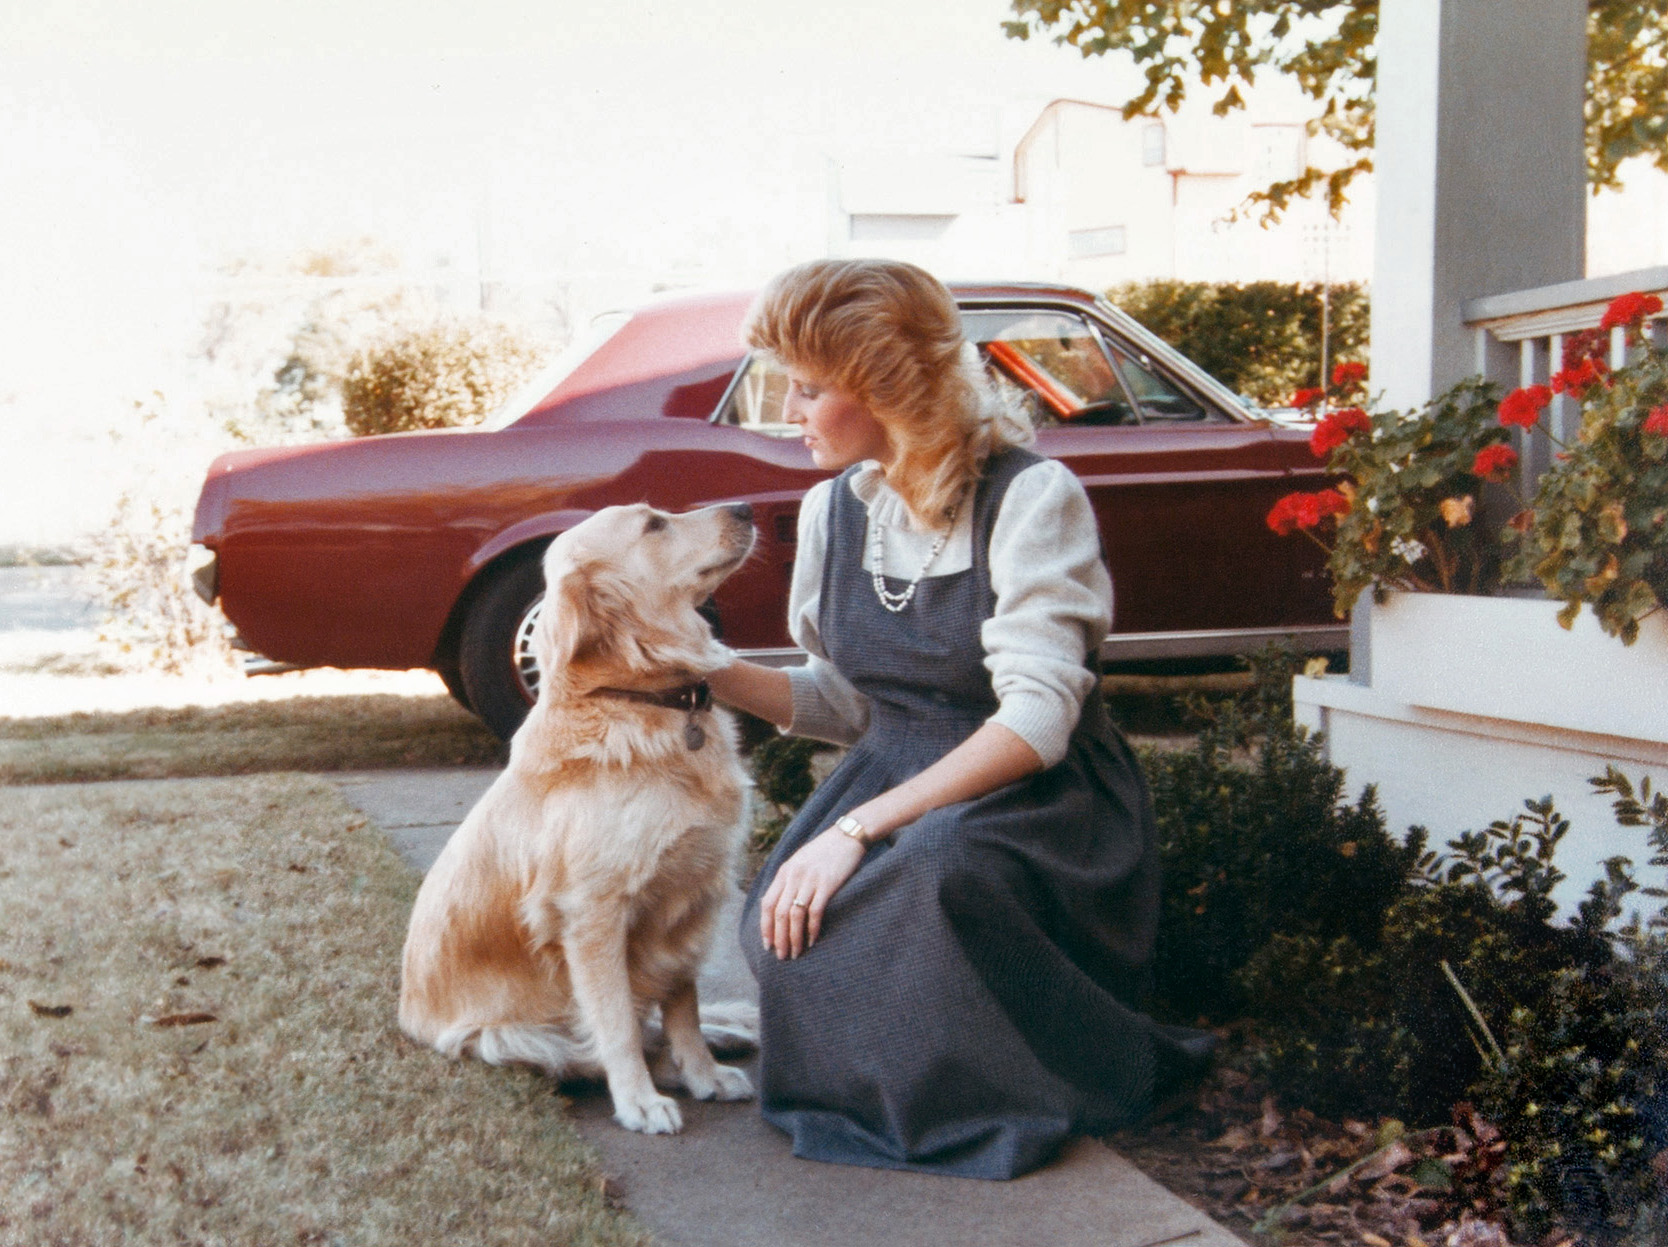 My mother outside her home in Dallas with our golden retriever Nikki and my dad's 1967 Ford Mustang. View full size.